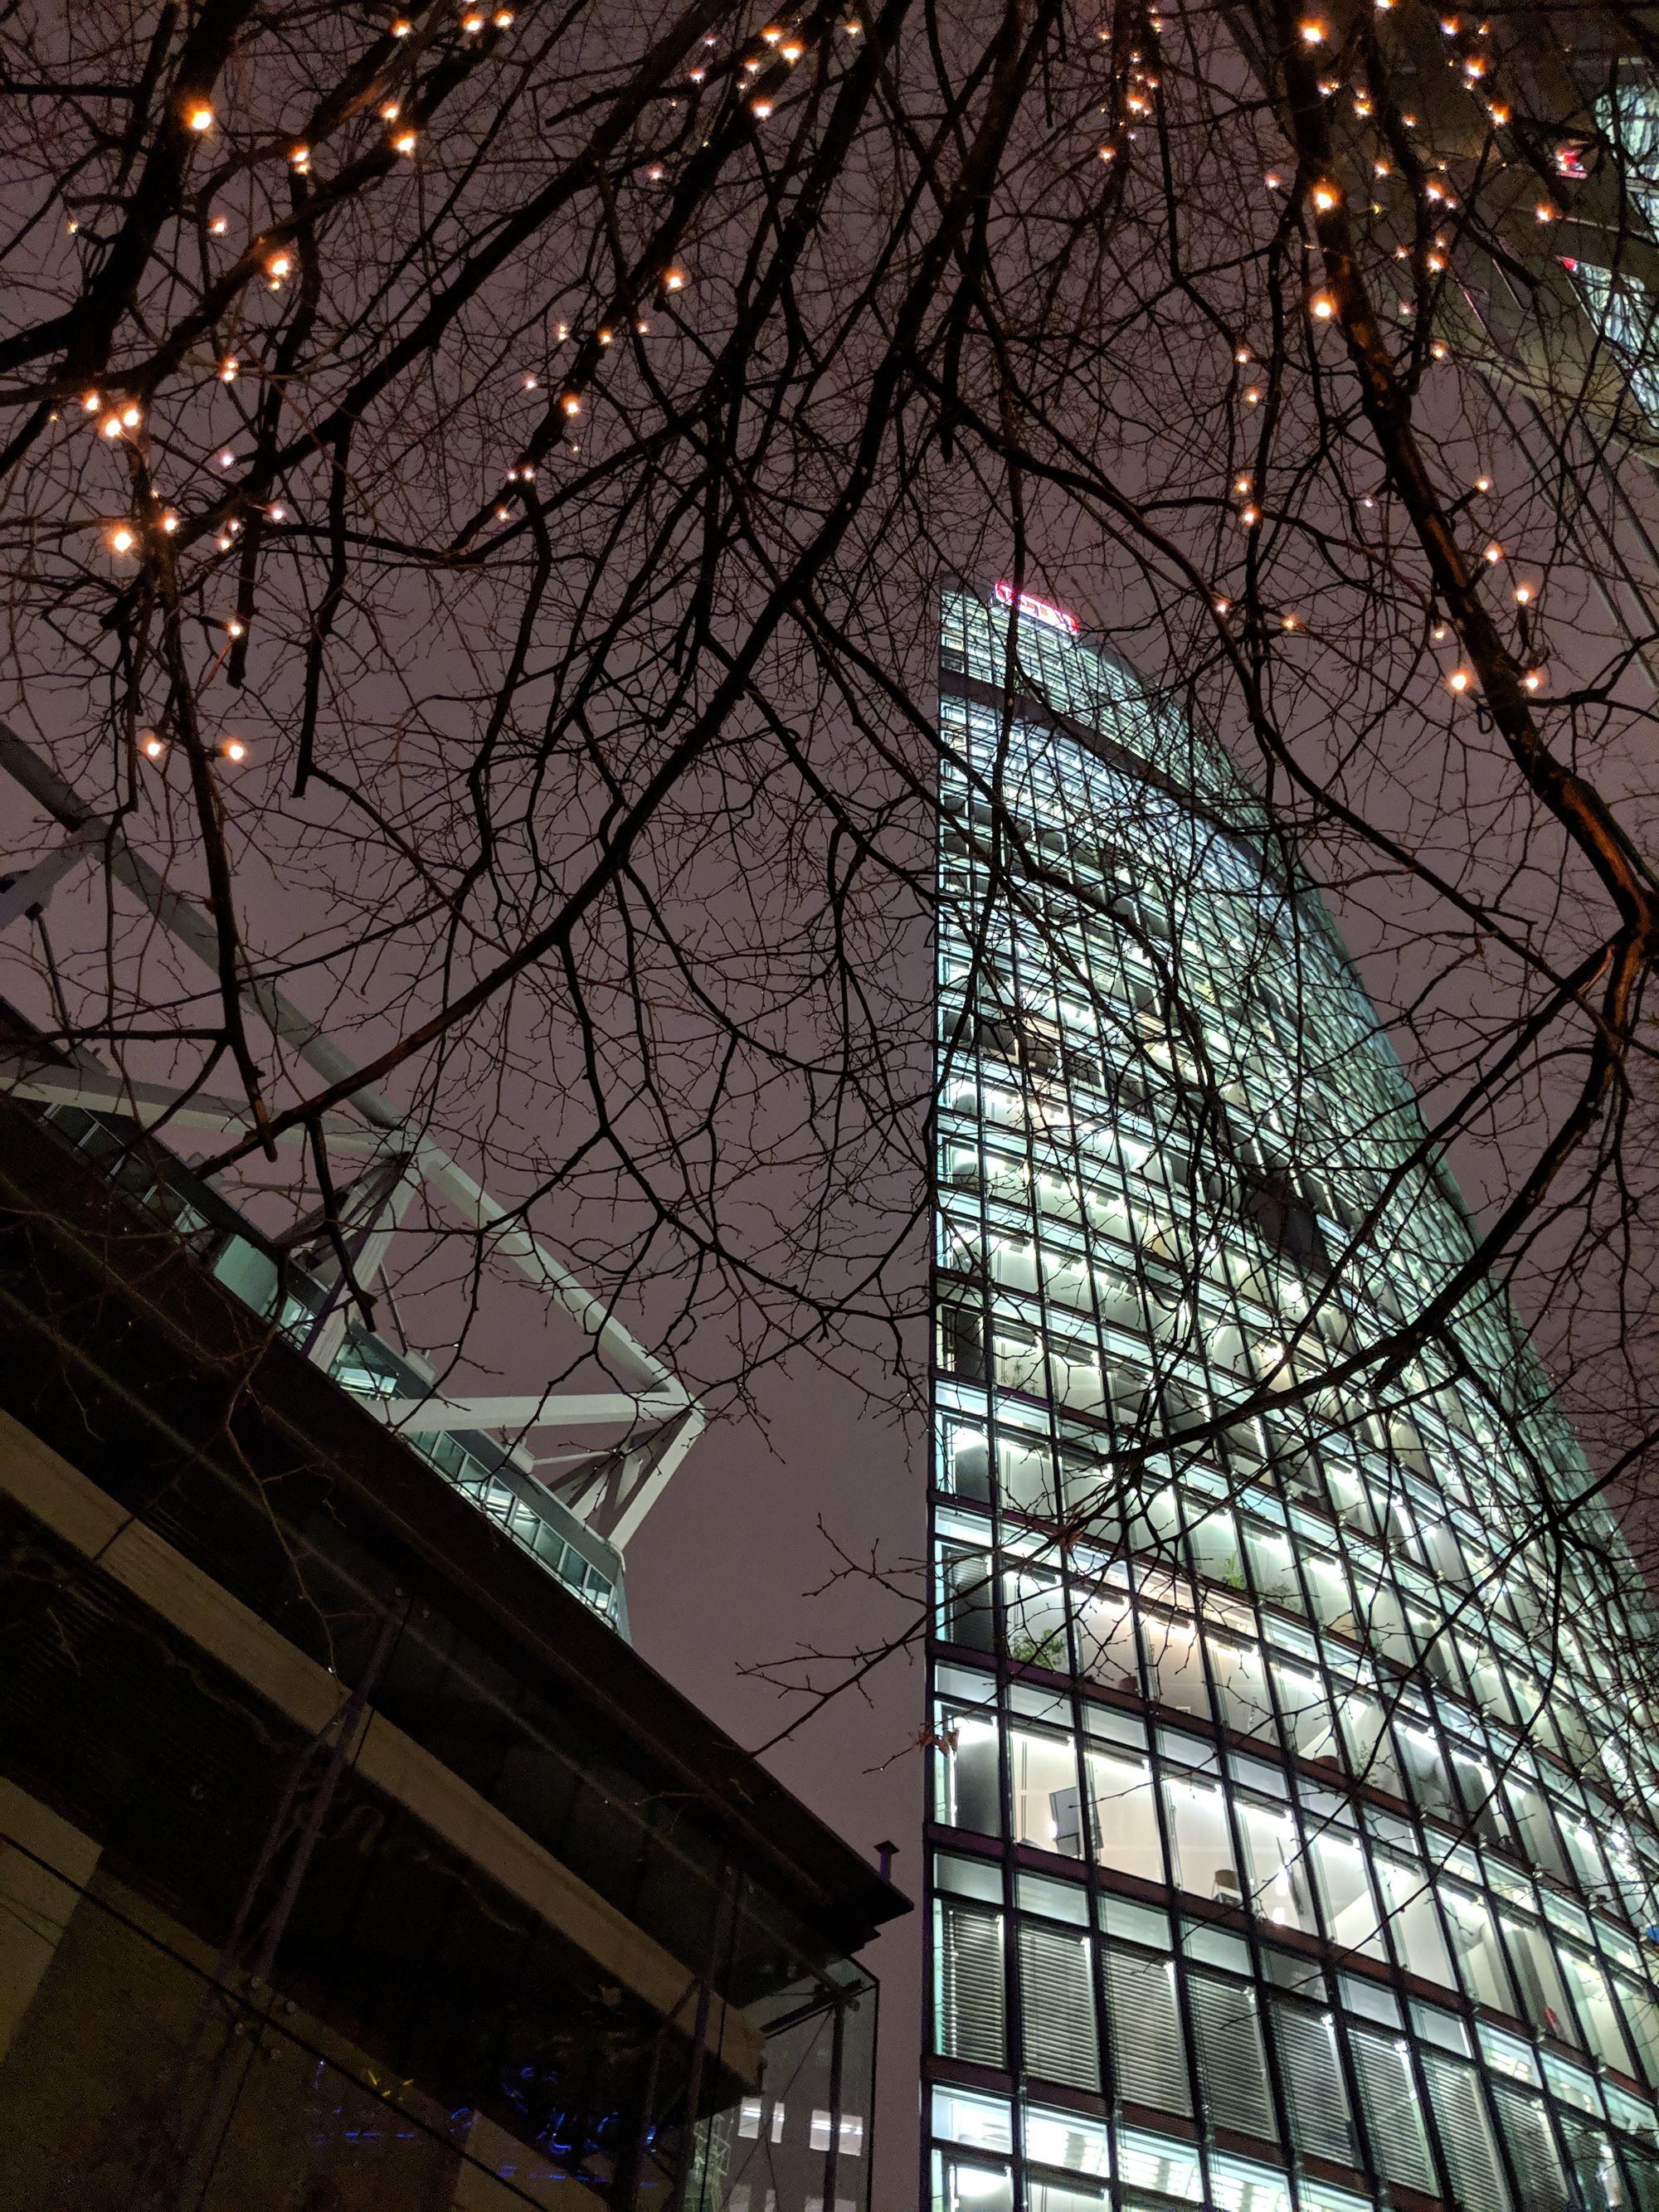 A night picture of a tree in winter, in front of a glass skyscraper with all the lights on. Taken with Pixel 2.